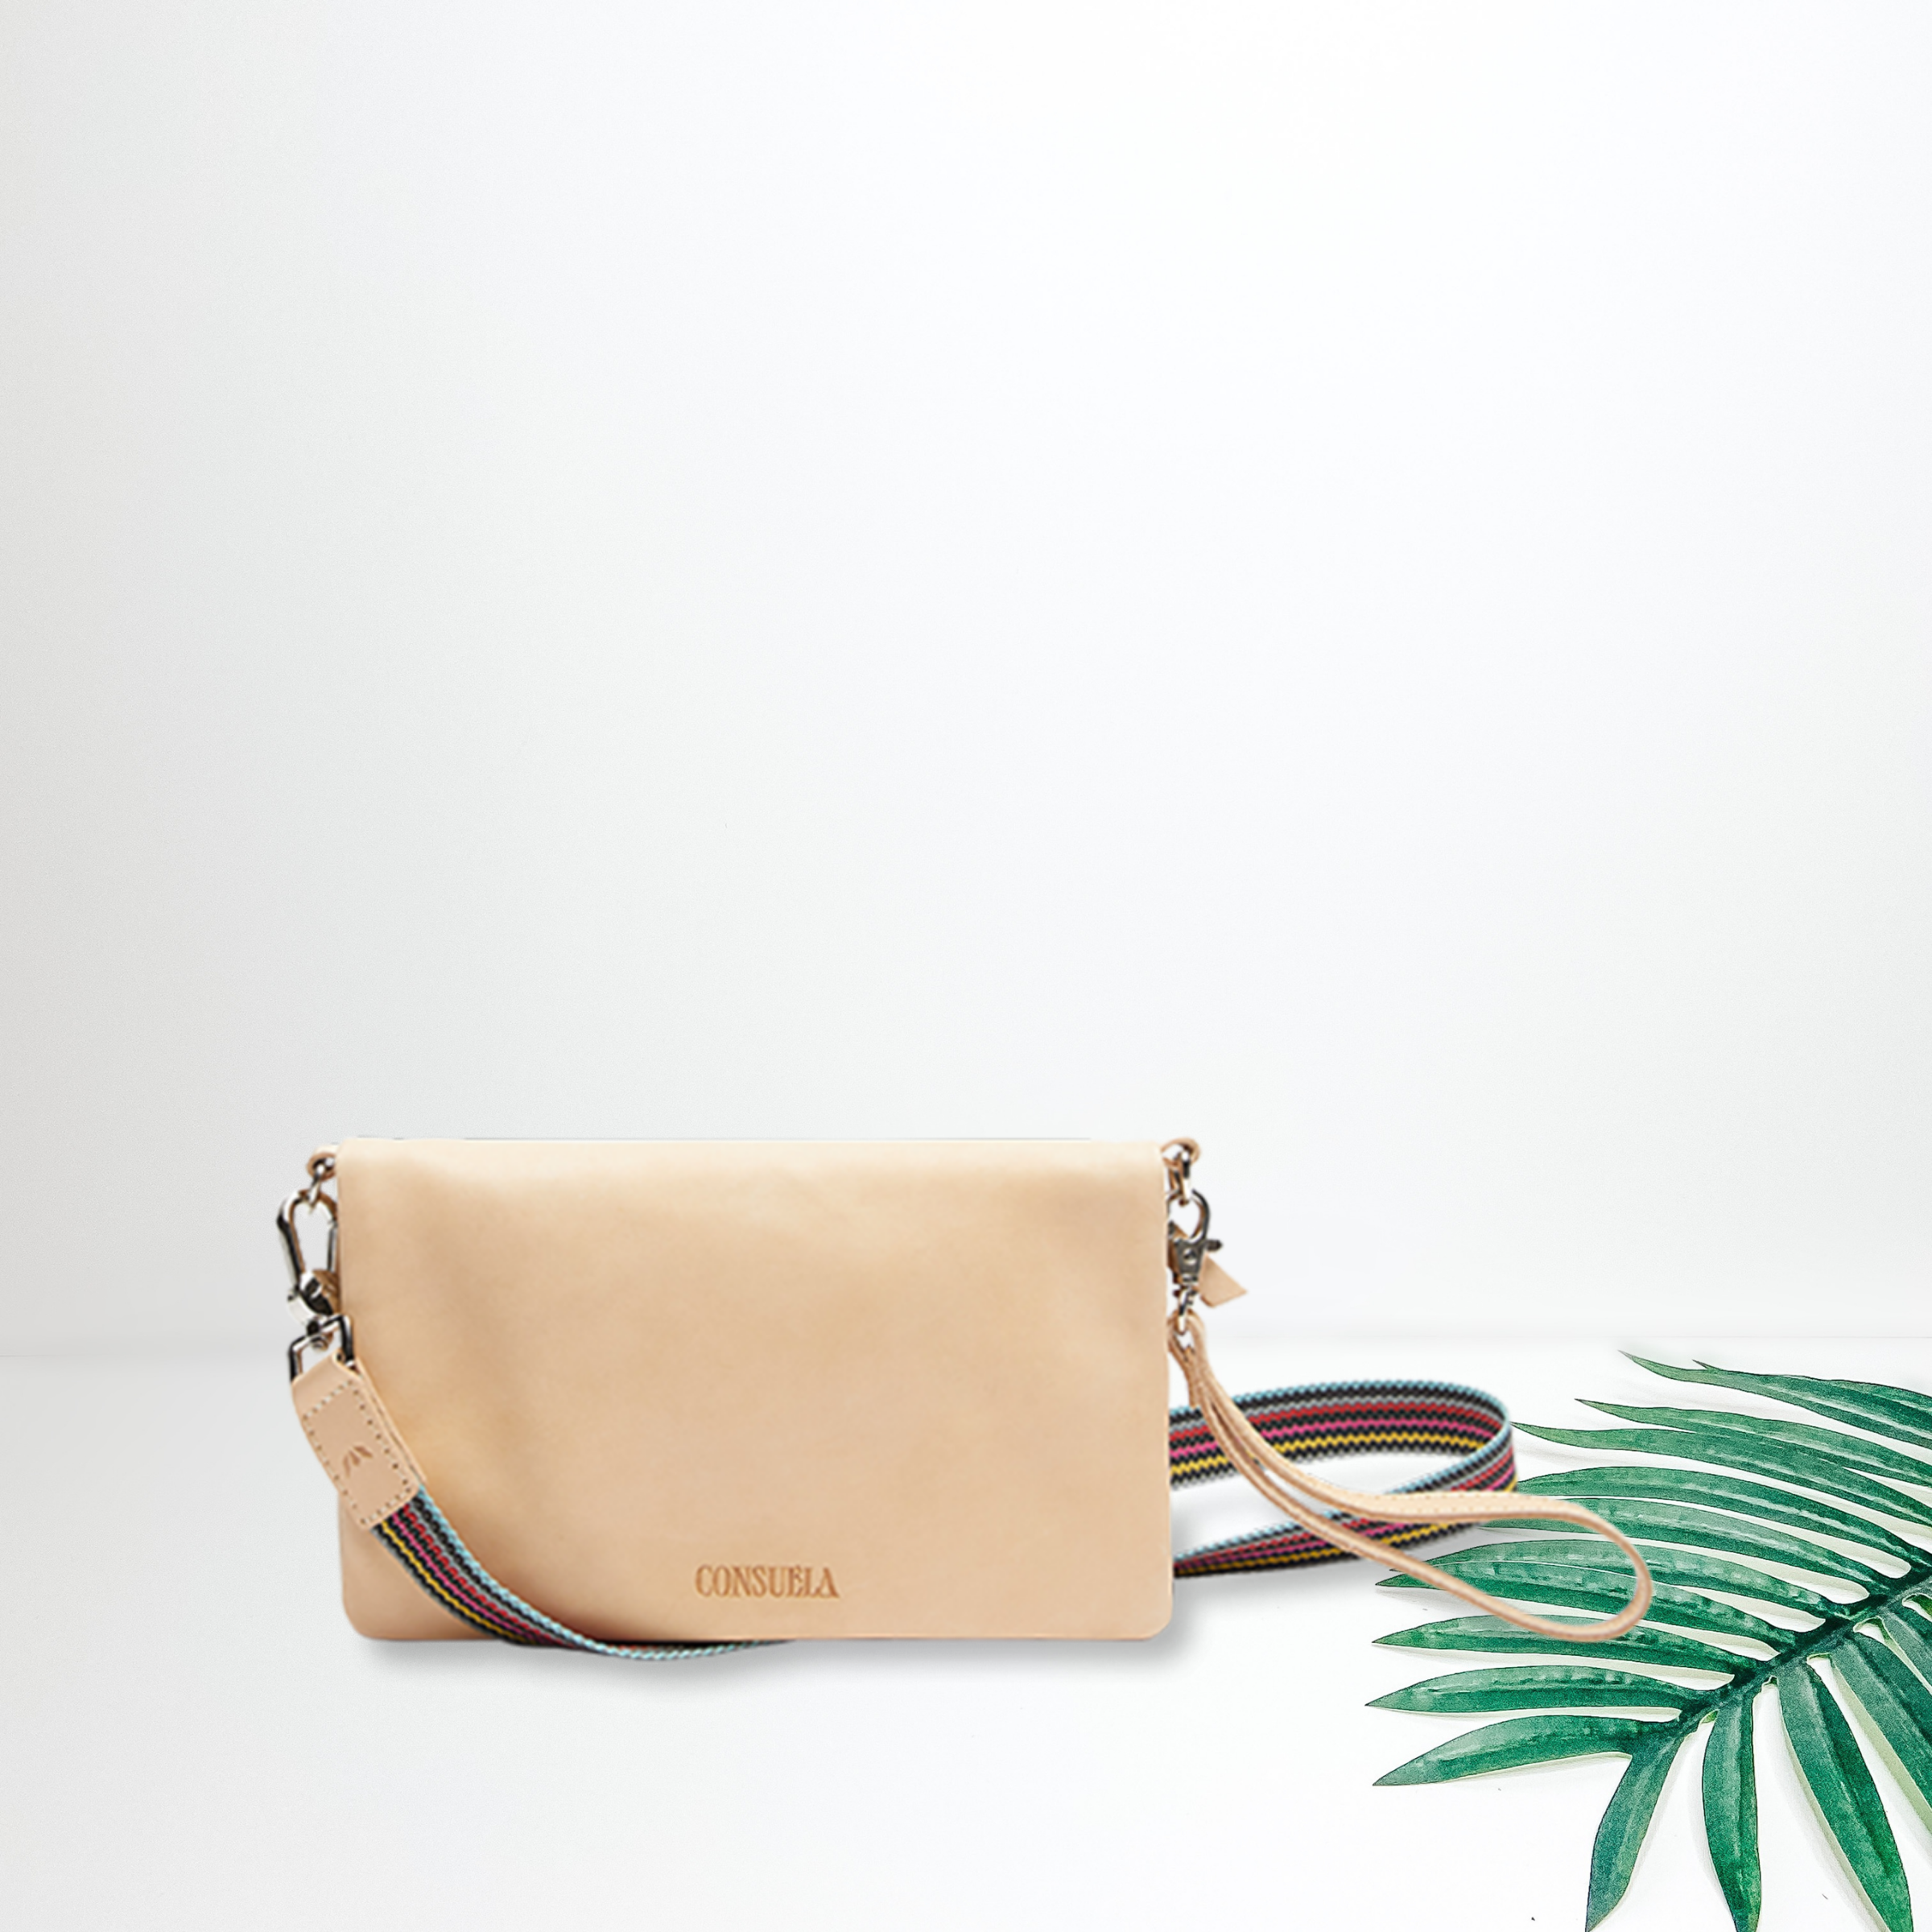 Centered in the picture is a crossbody purse in nude leather. To the right of the bag is a palm leaf, all on a white background.